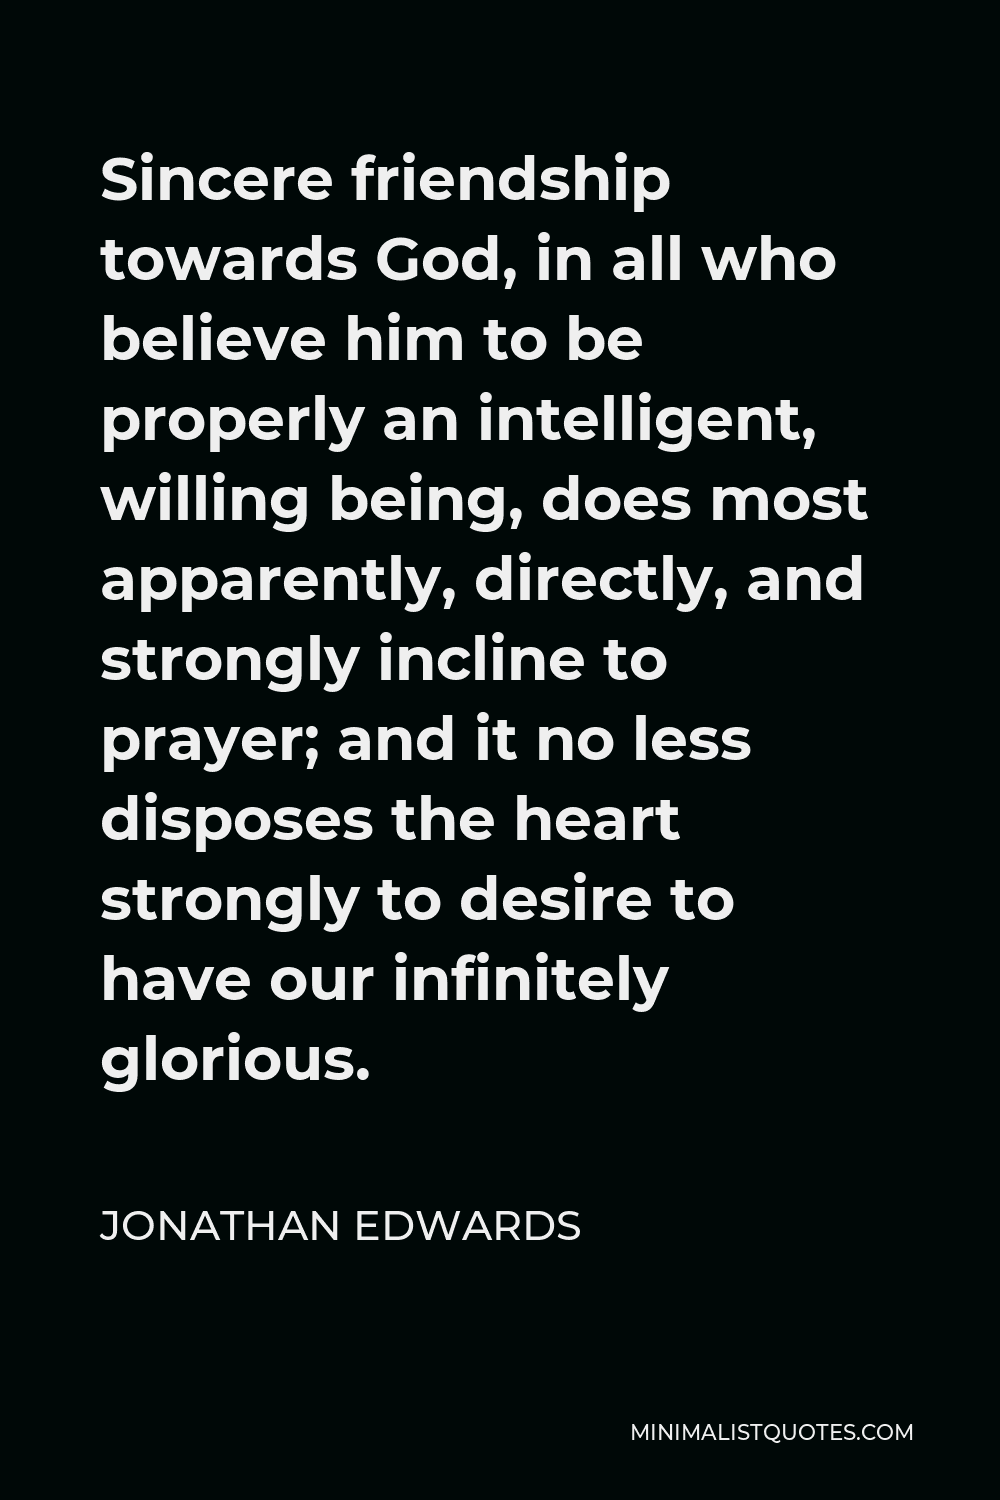 Jonathan Edwards Quote - Sincere friendship towards God, in all who believe him to be properly an intelligent, willing being, does most apparently, directly, and strongly incline to prayer; and it no less disposes the heart strongly to desire to have our infinitely glorious.